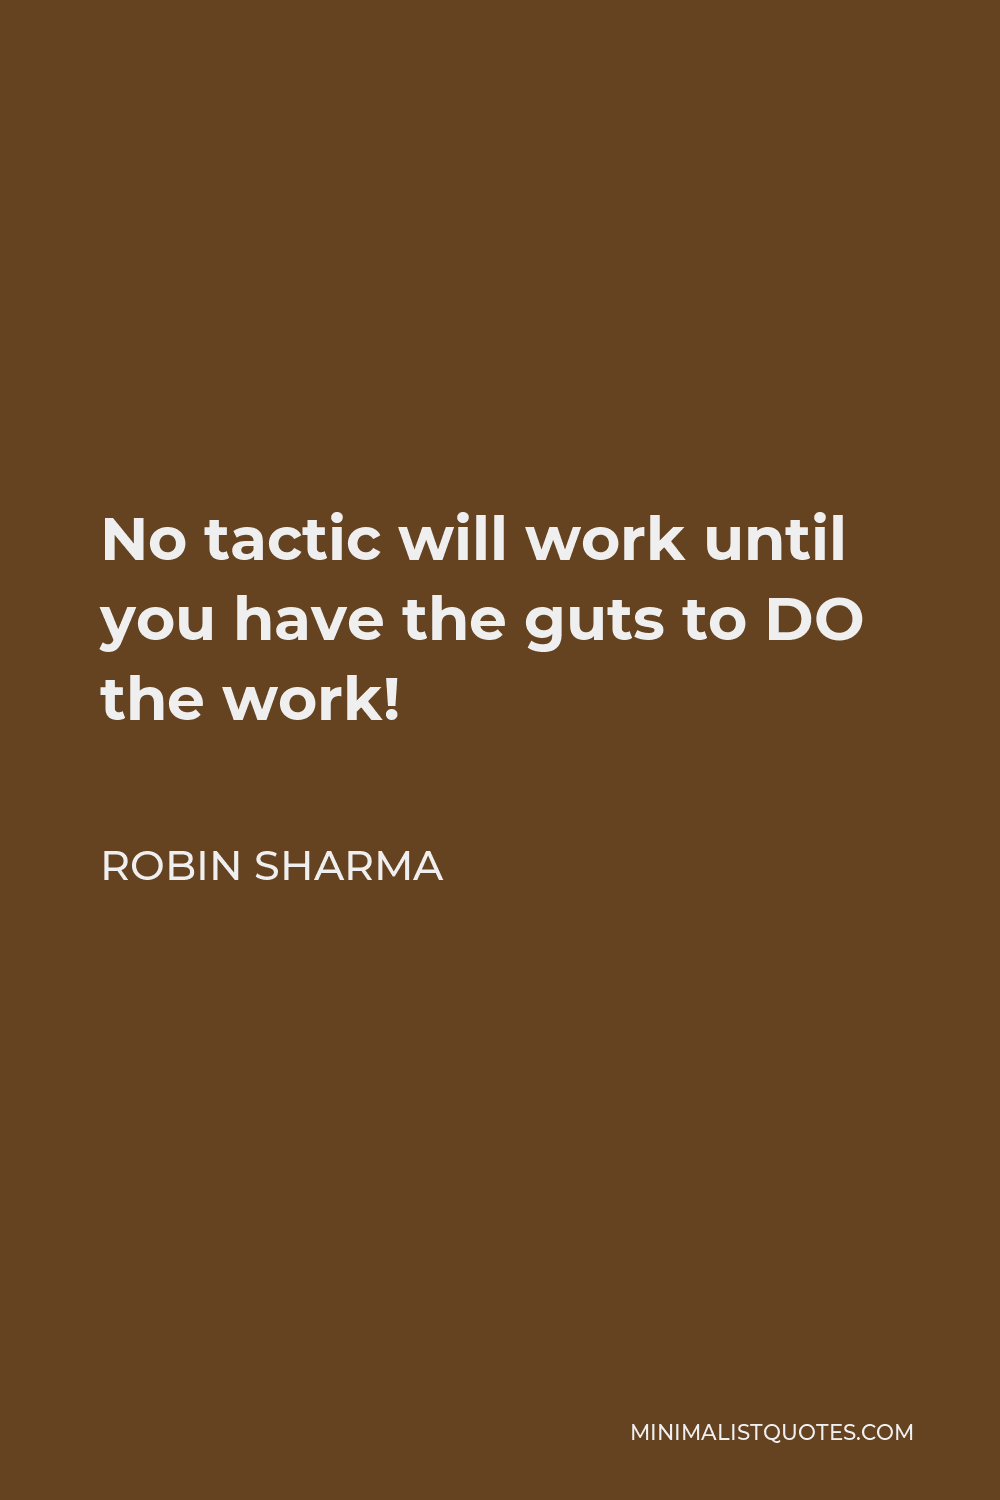 Robin Sharma Quote - No tactic will work until you have the guts to DO the work!